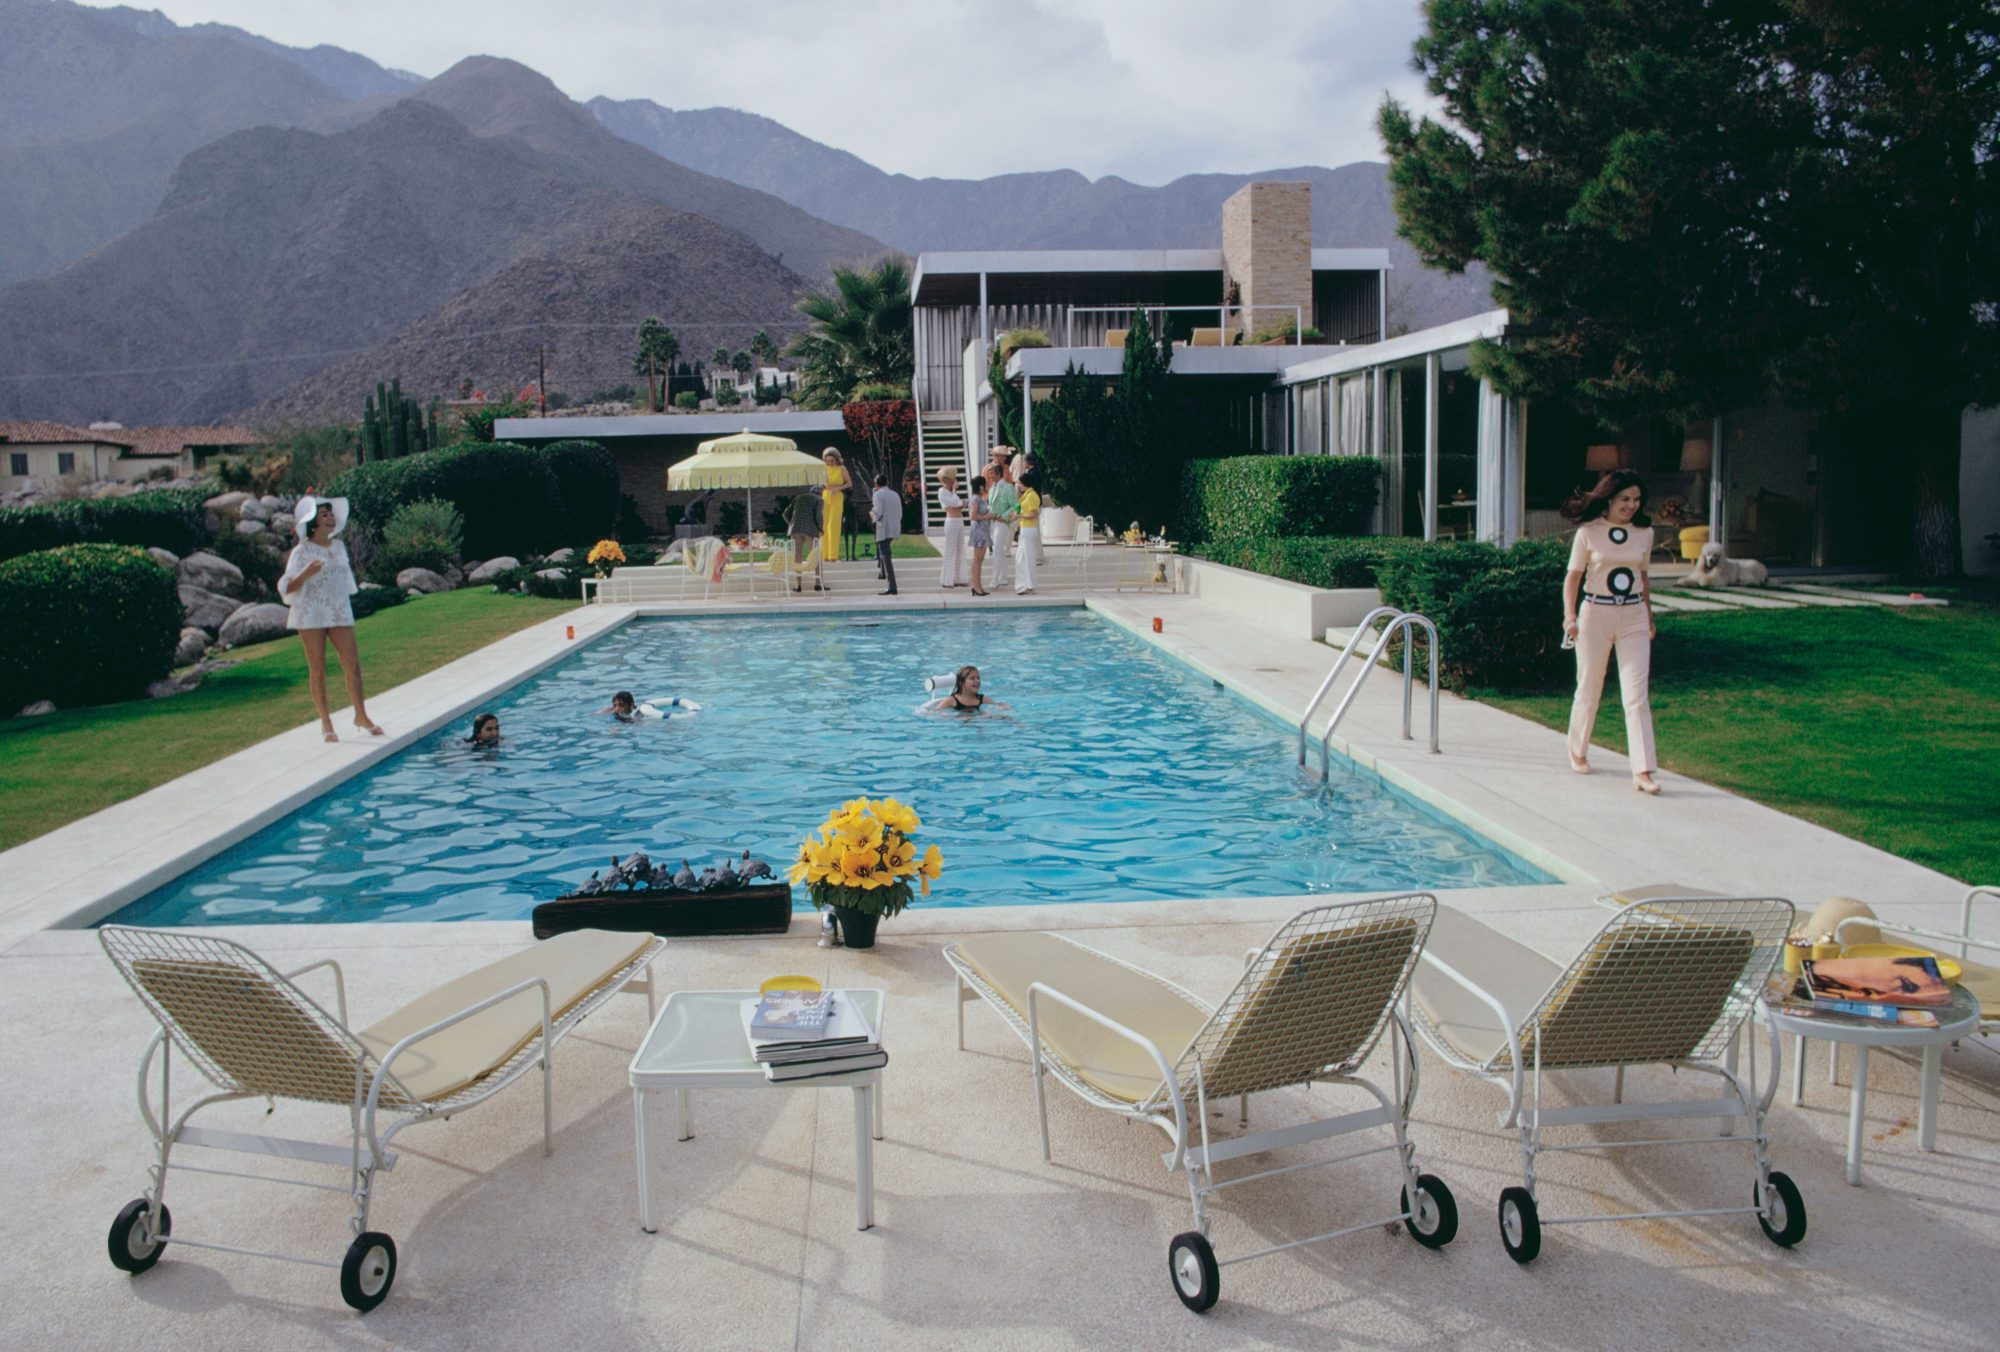 January 1970: The Kaufmann Desert House in Palm Springs, California, designed by Richard Neutra in 1946 for businessman Edgar J. Kaufmann, and now owned by Nelda Linsk. (Photo by Slim Aarons/Hulton Archive/Getty Images)